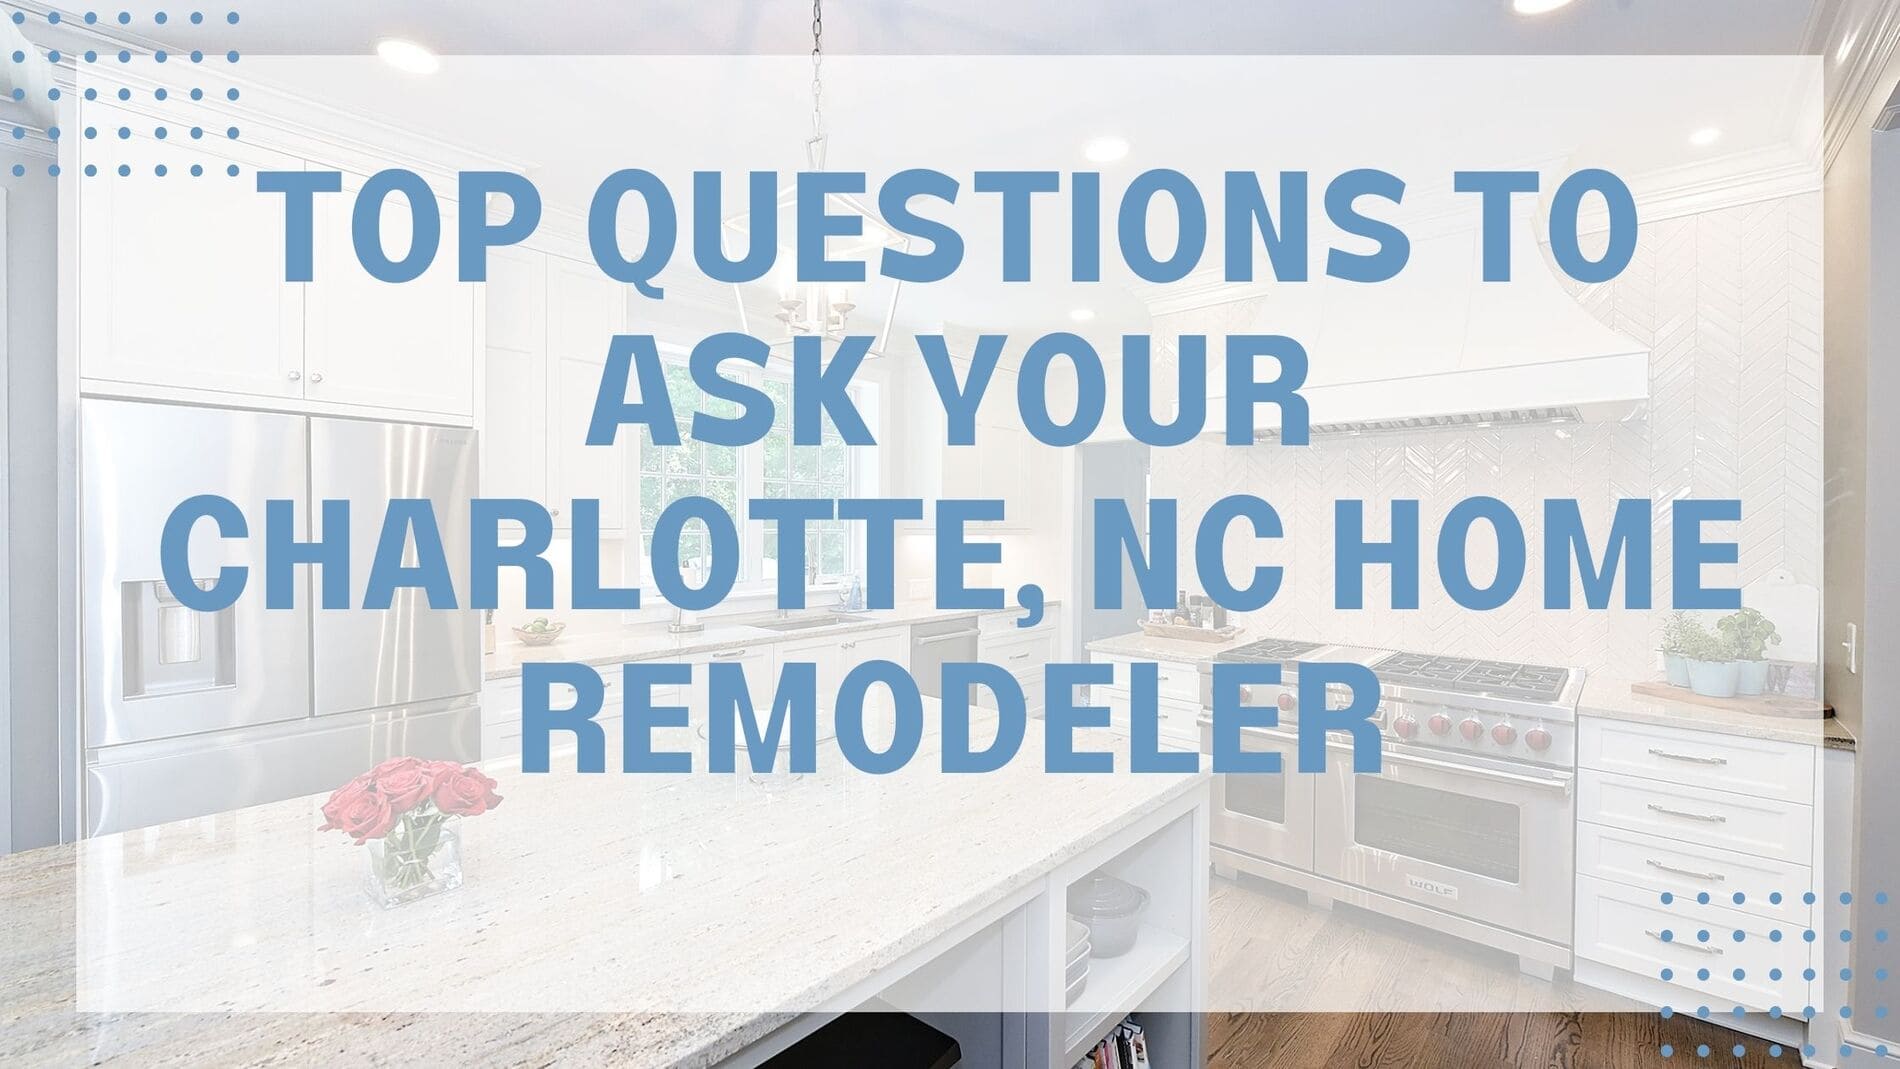 Top Questions to Ask Your Charlotte, NC Home Remodeler